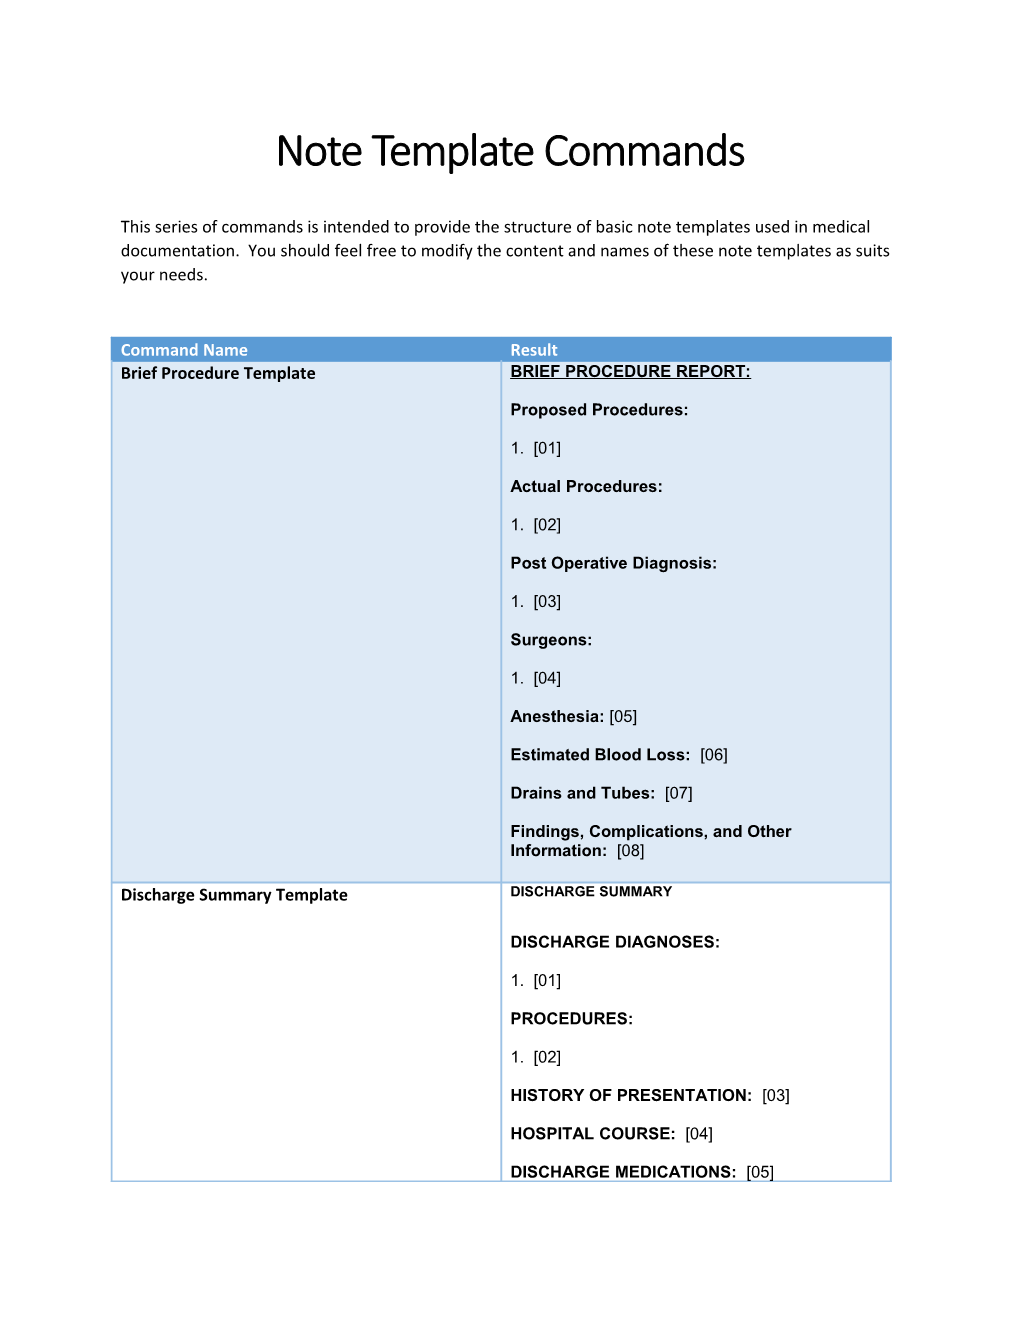 Note Template Commands